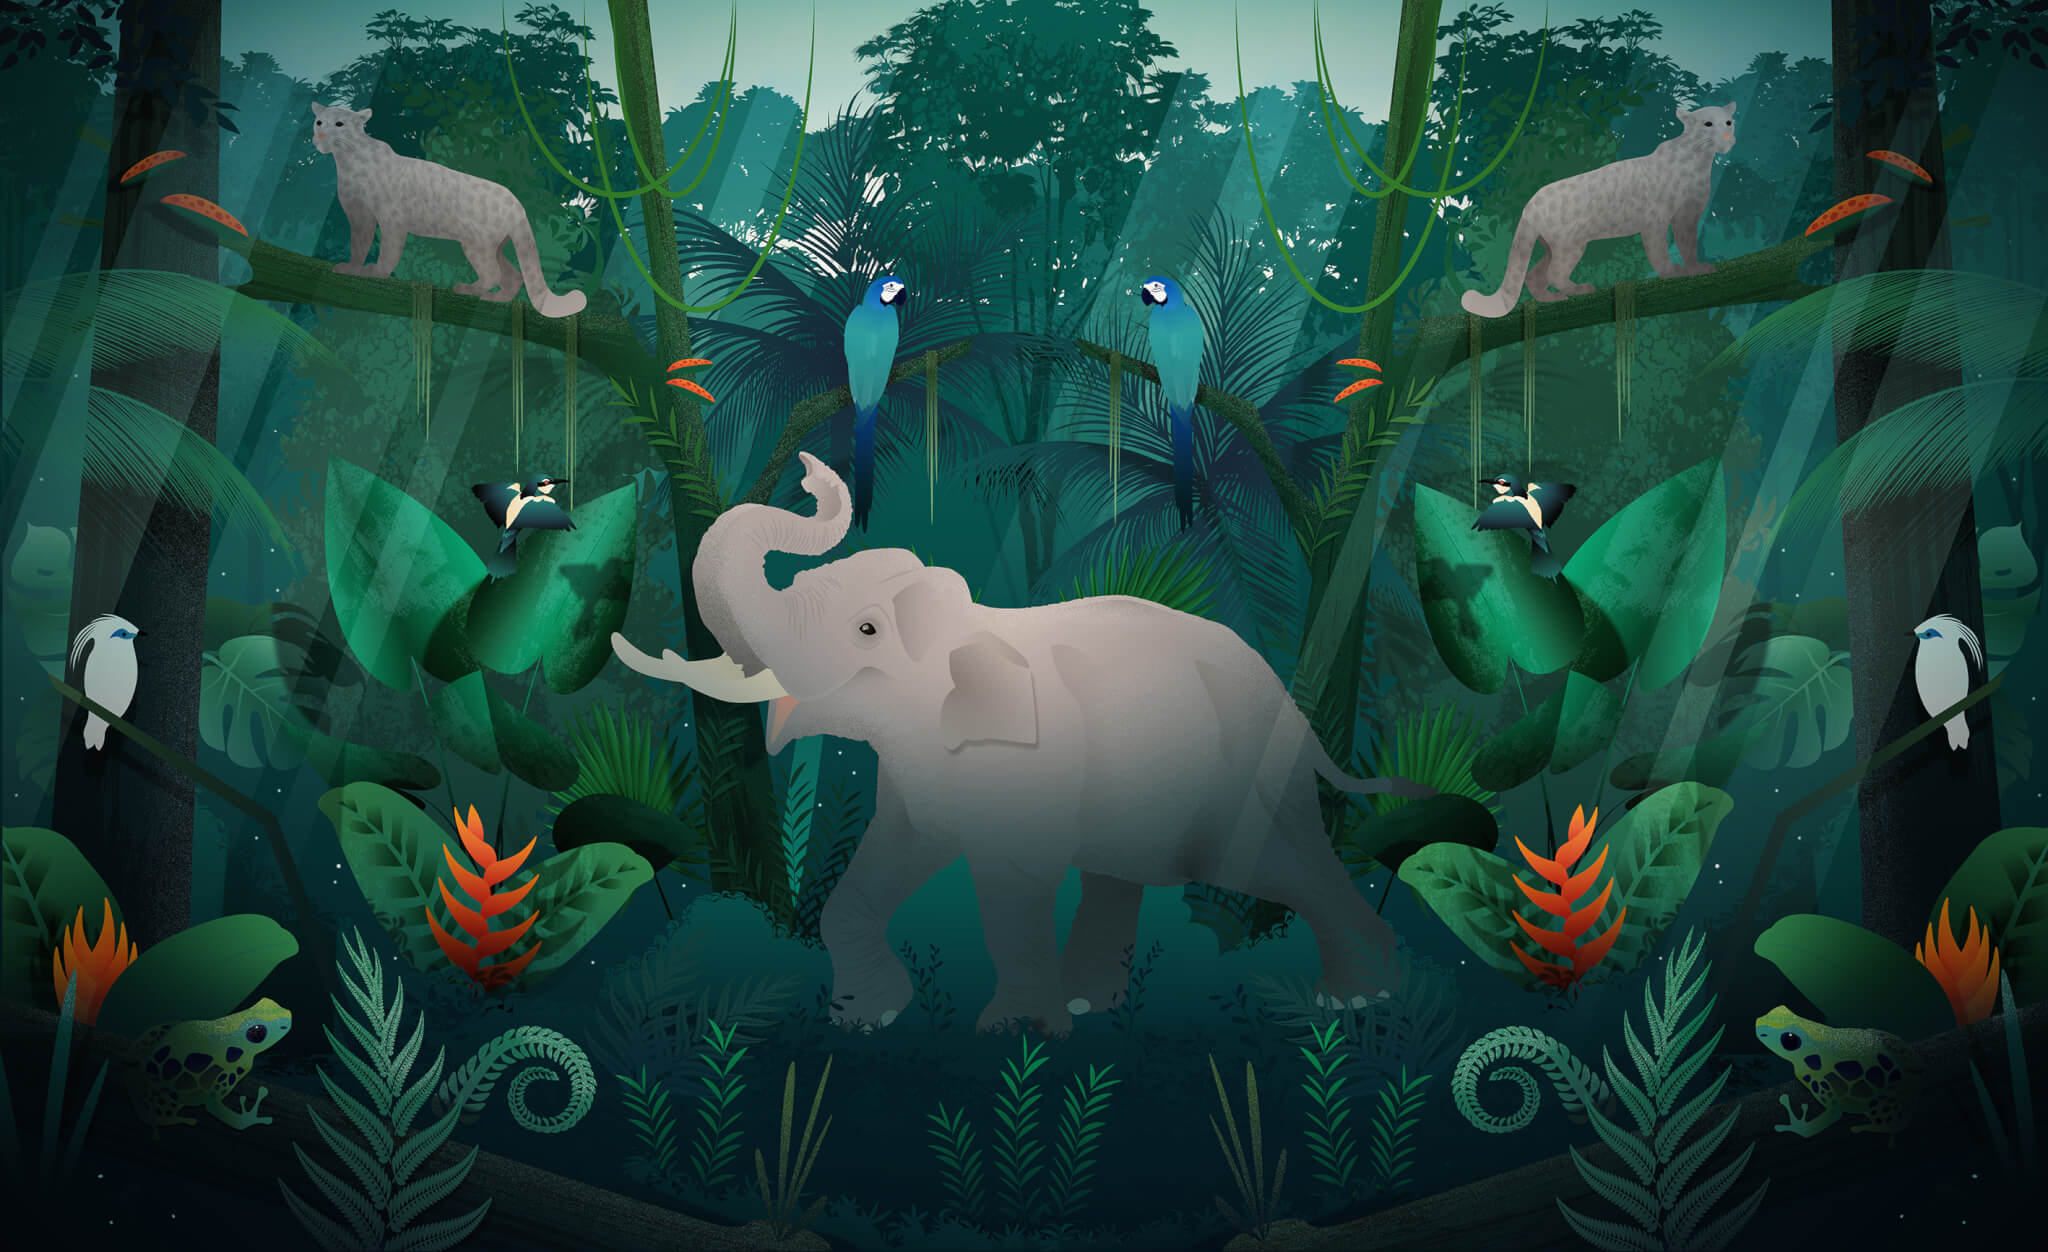 Forest scene with frogs, birds, palms, leopards, and an elephant.